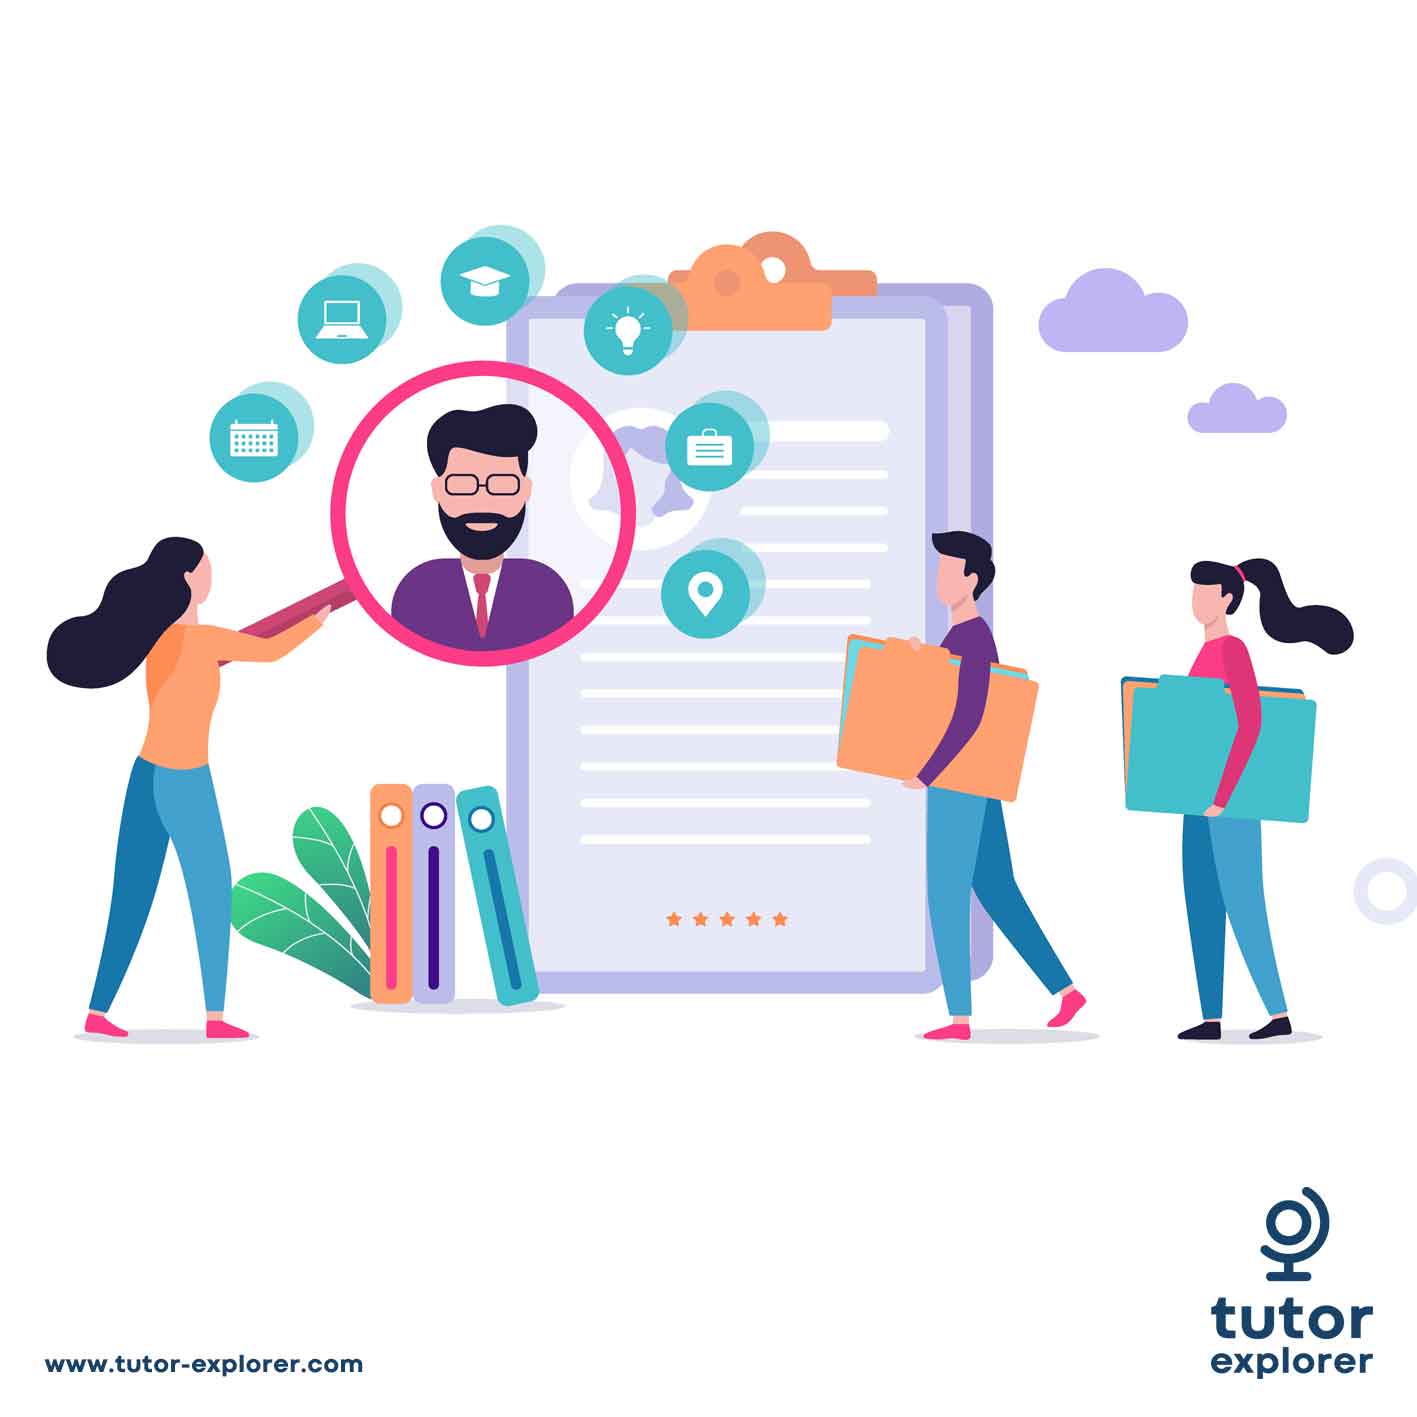 Tutor Explorer - Online and Home Based Tutors for one to one private tuition - www.tutor-explorer.com - Tutors For Ages, Levels and Subjects at Pre-School - Primary School - Secondary School - College - University - Adult Learning Levels